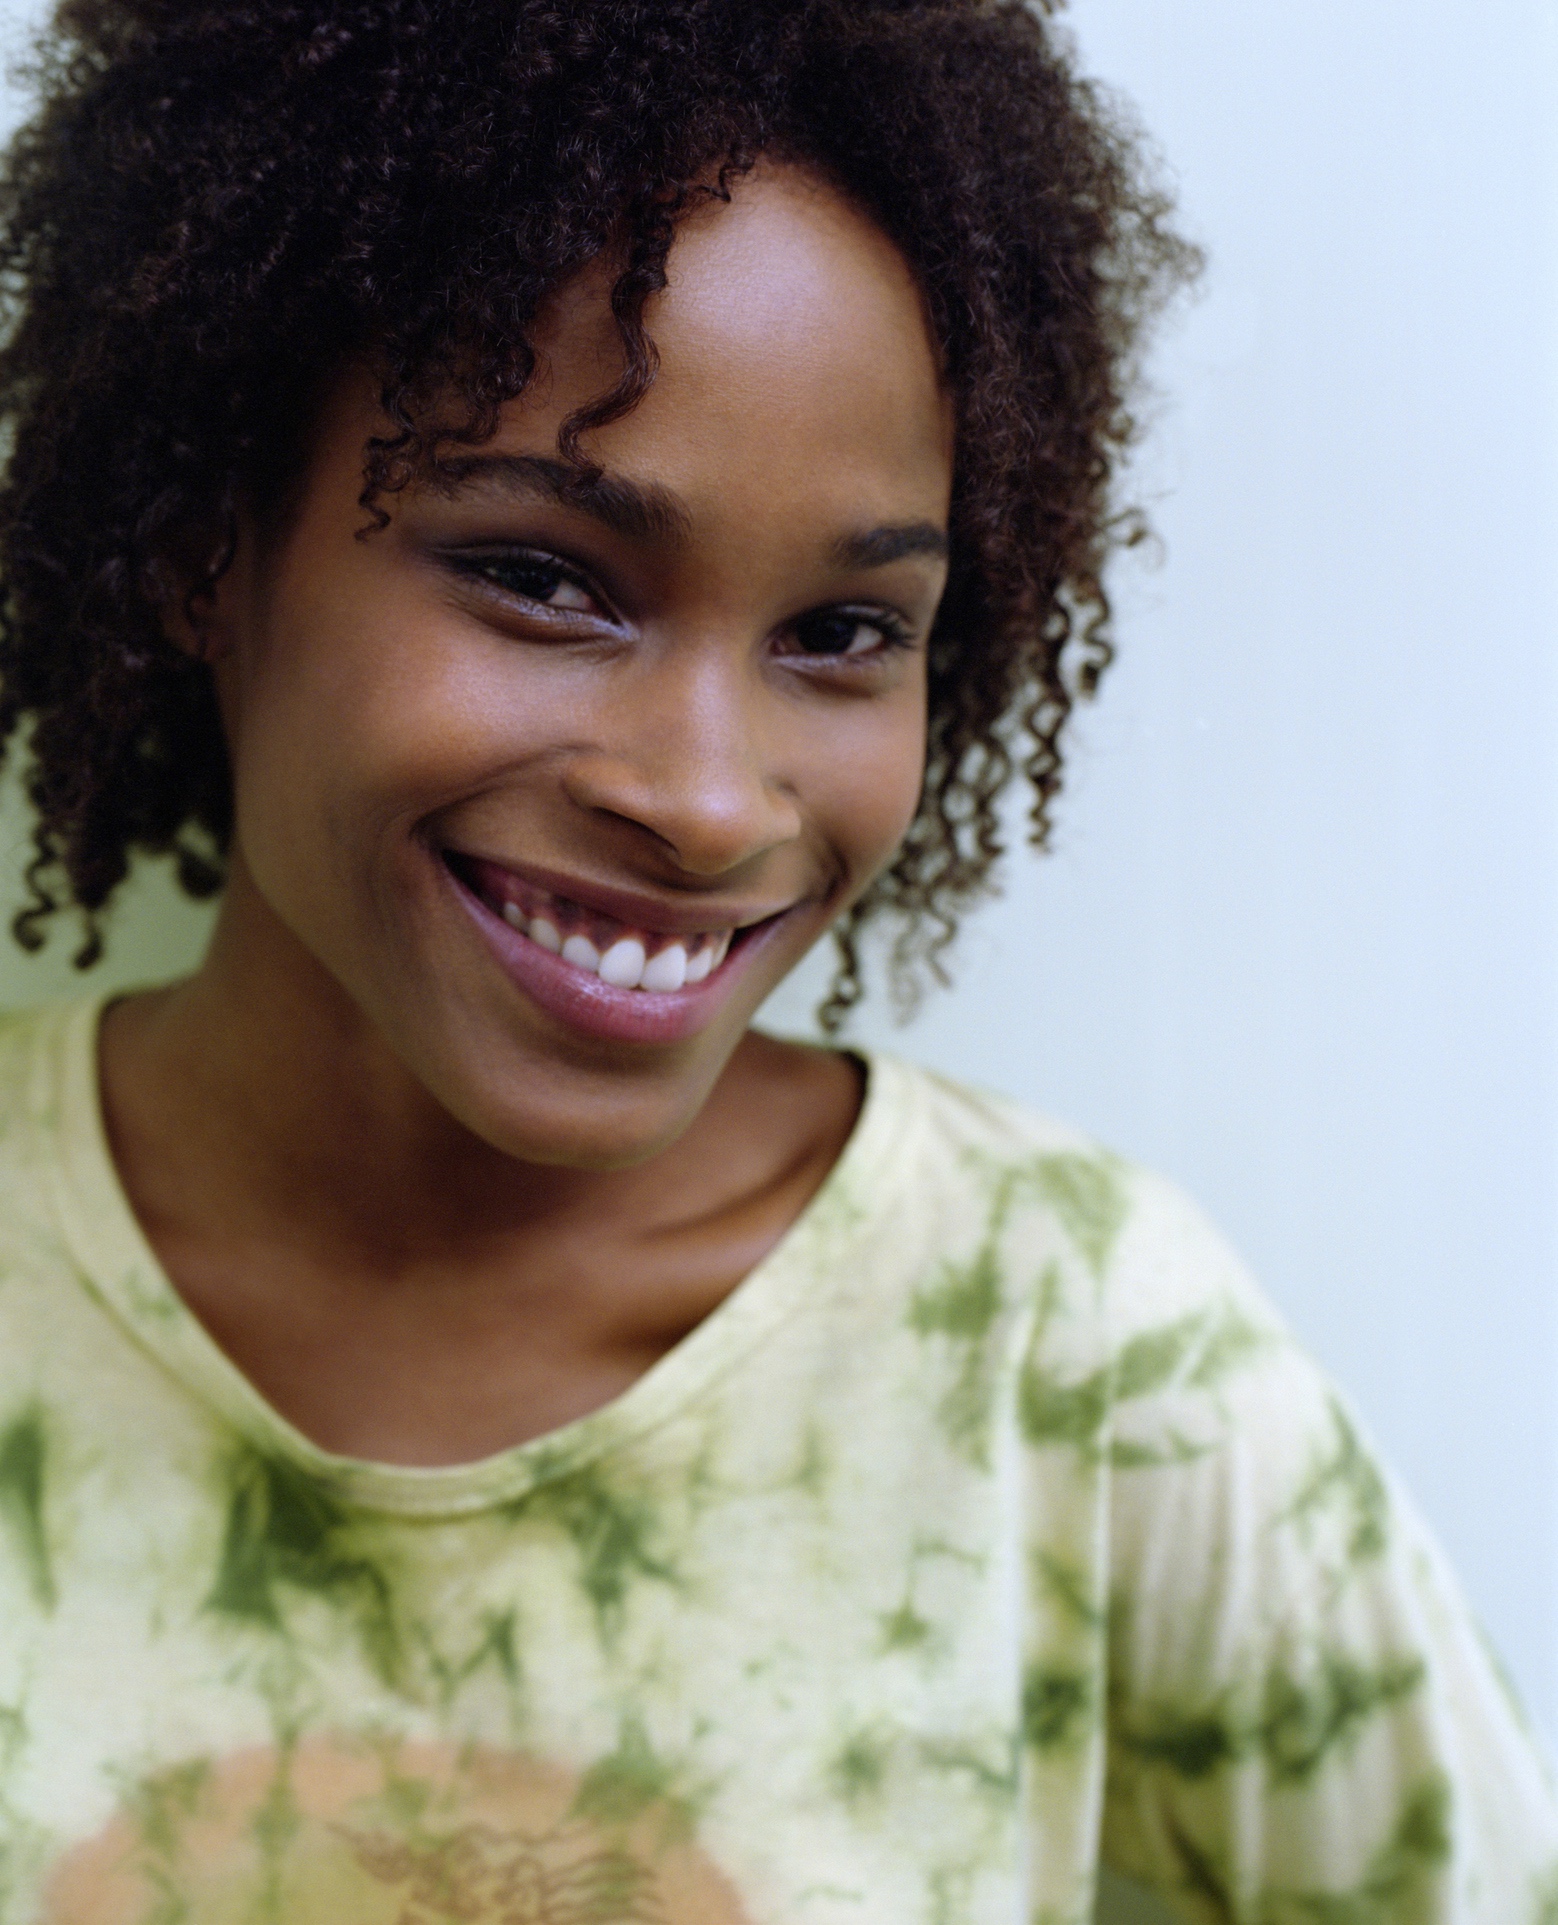 African-American woman smiling.